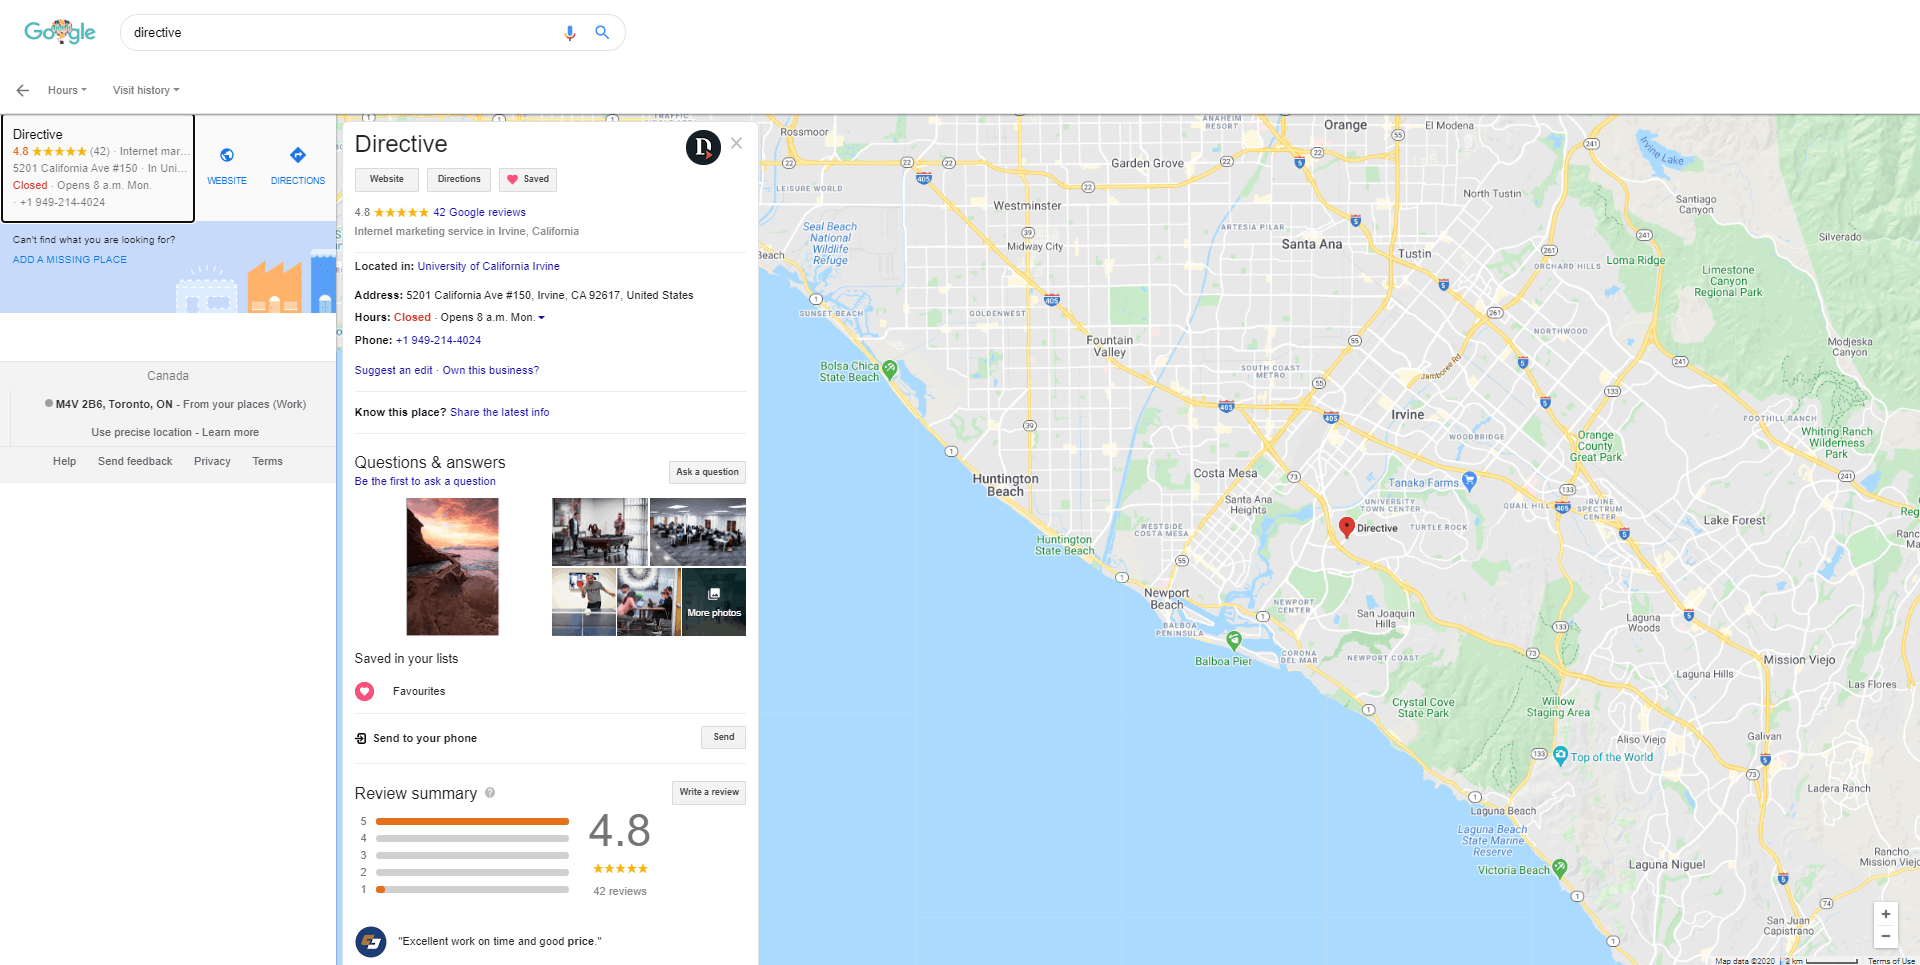 Results on Google's Local Finder